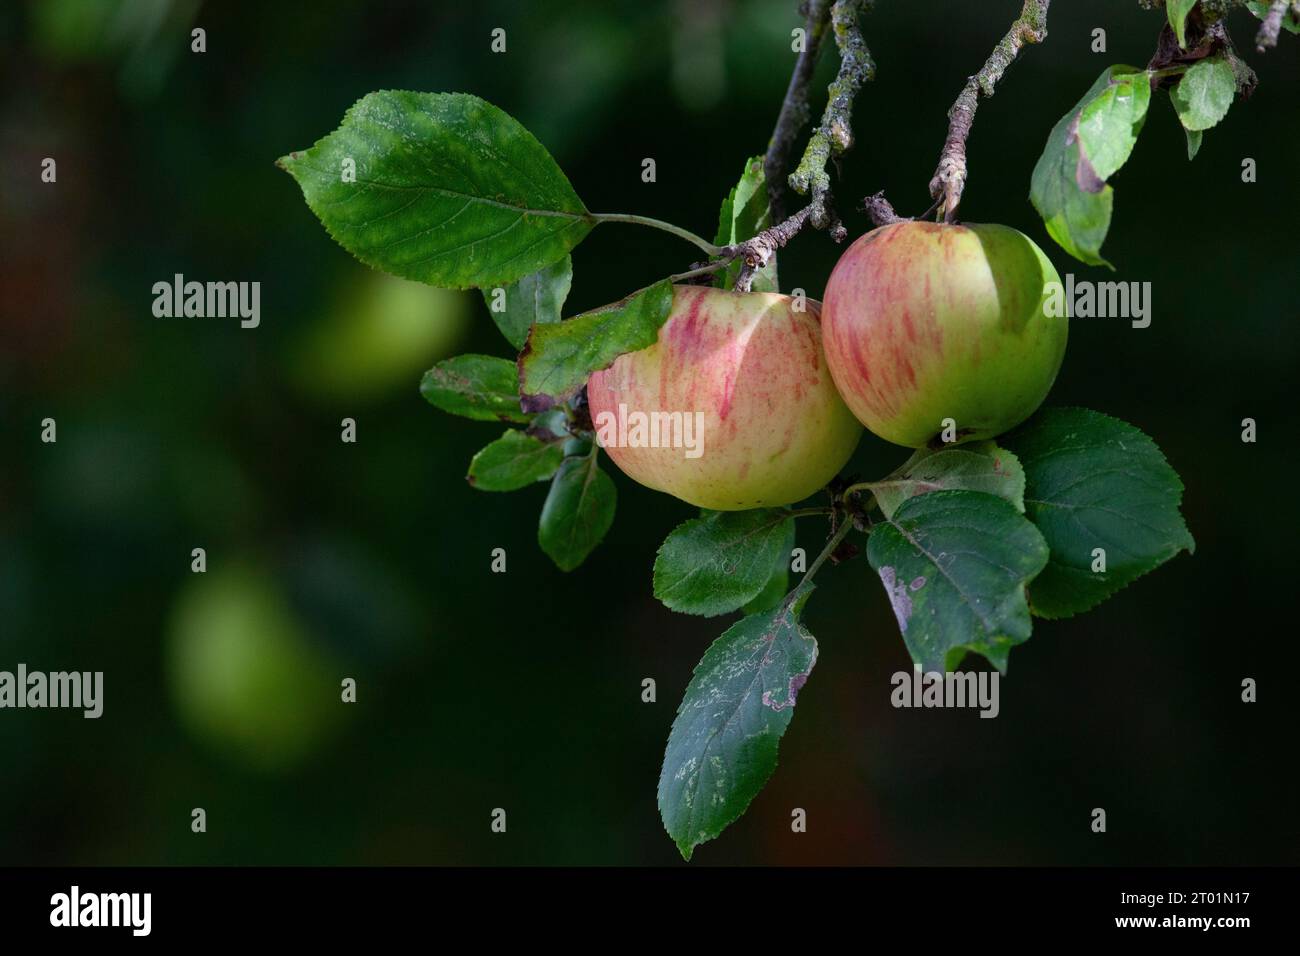 UK weather, 3 October 2023: As autumn progresses apples ripen on a tree in the photographer's garden in Clapham, London. Weather forecasters are projecting temperatures of up to 26 degrees next weekend, well above the usual seasonal average for the time of year. Anna Watson/Alamy Live News Stock Photo